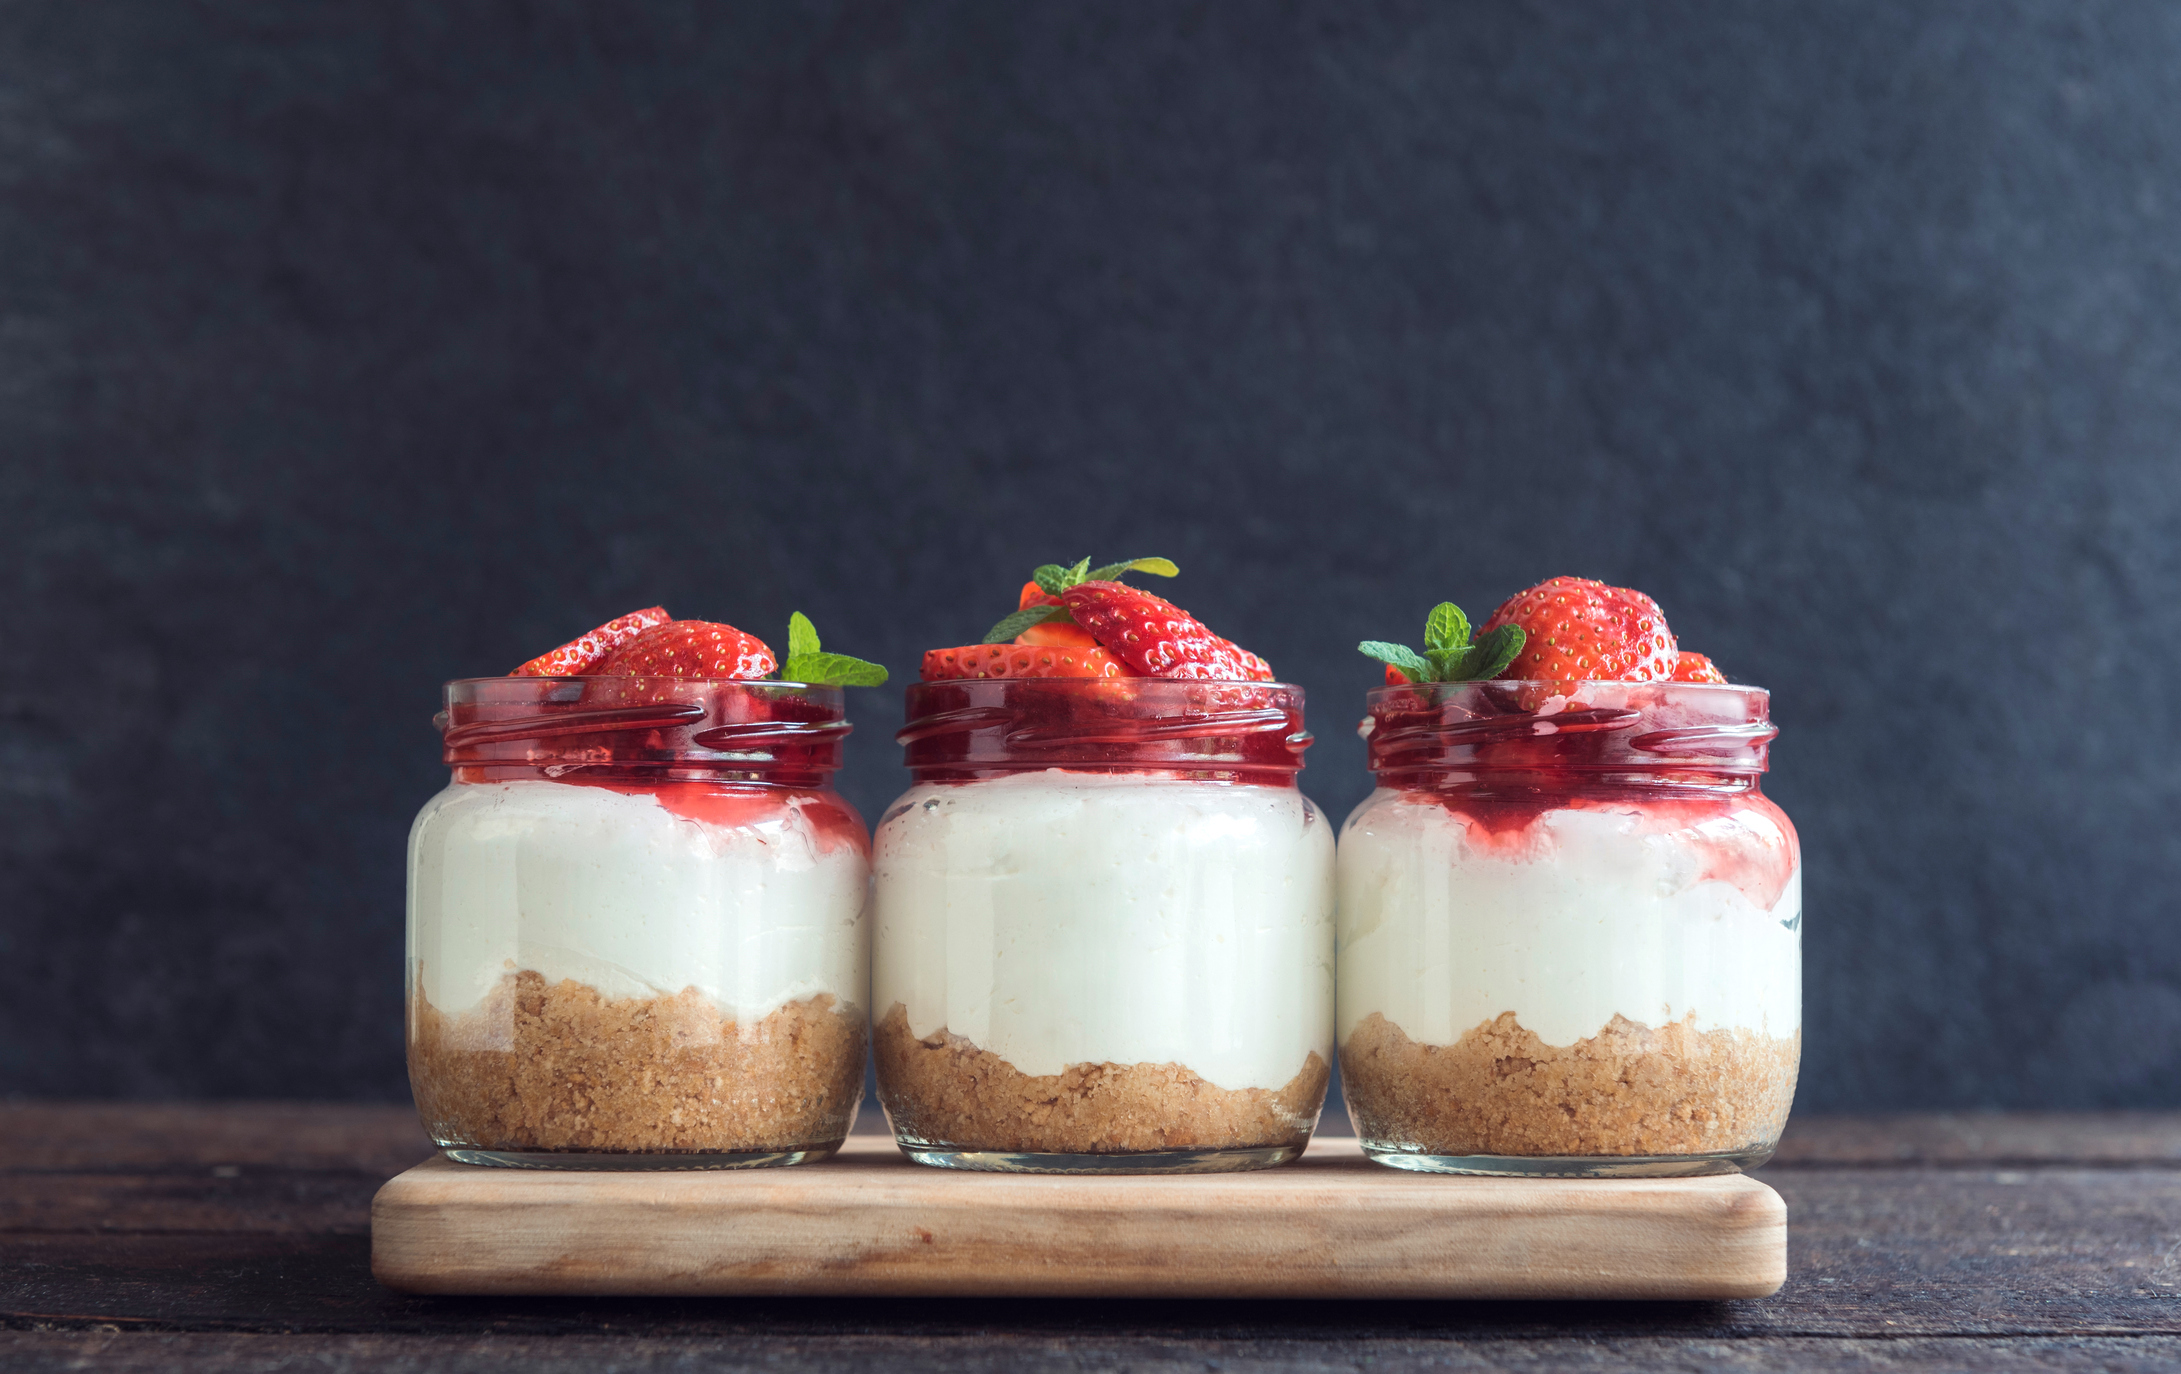 Sweet homemade cheesecake with strawberries in the jar on wooden background (Thinkstock/PA)